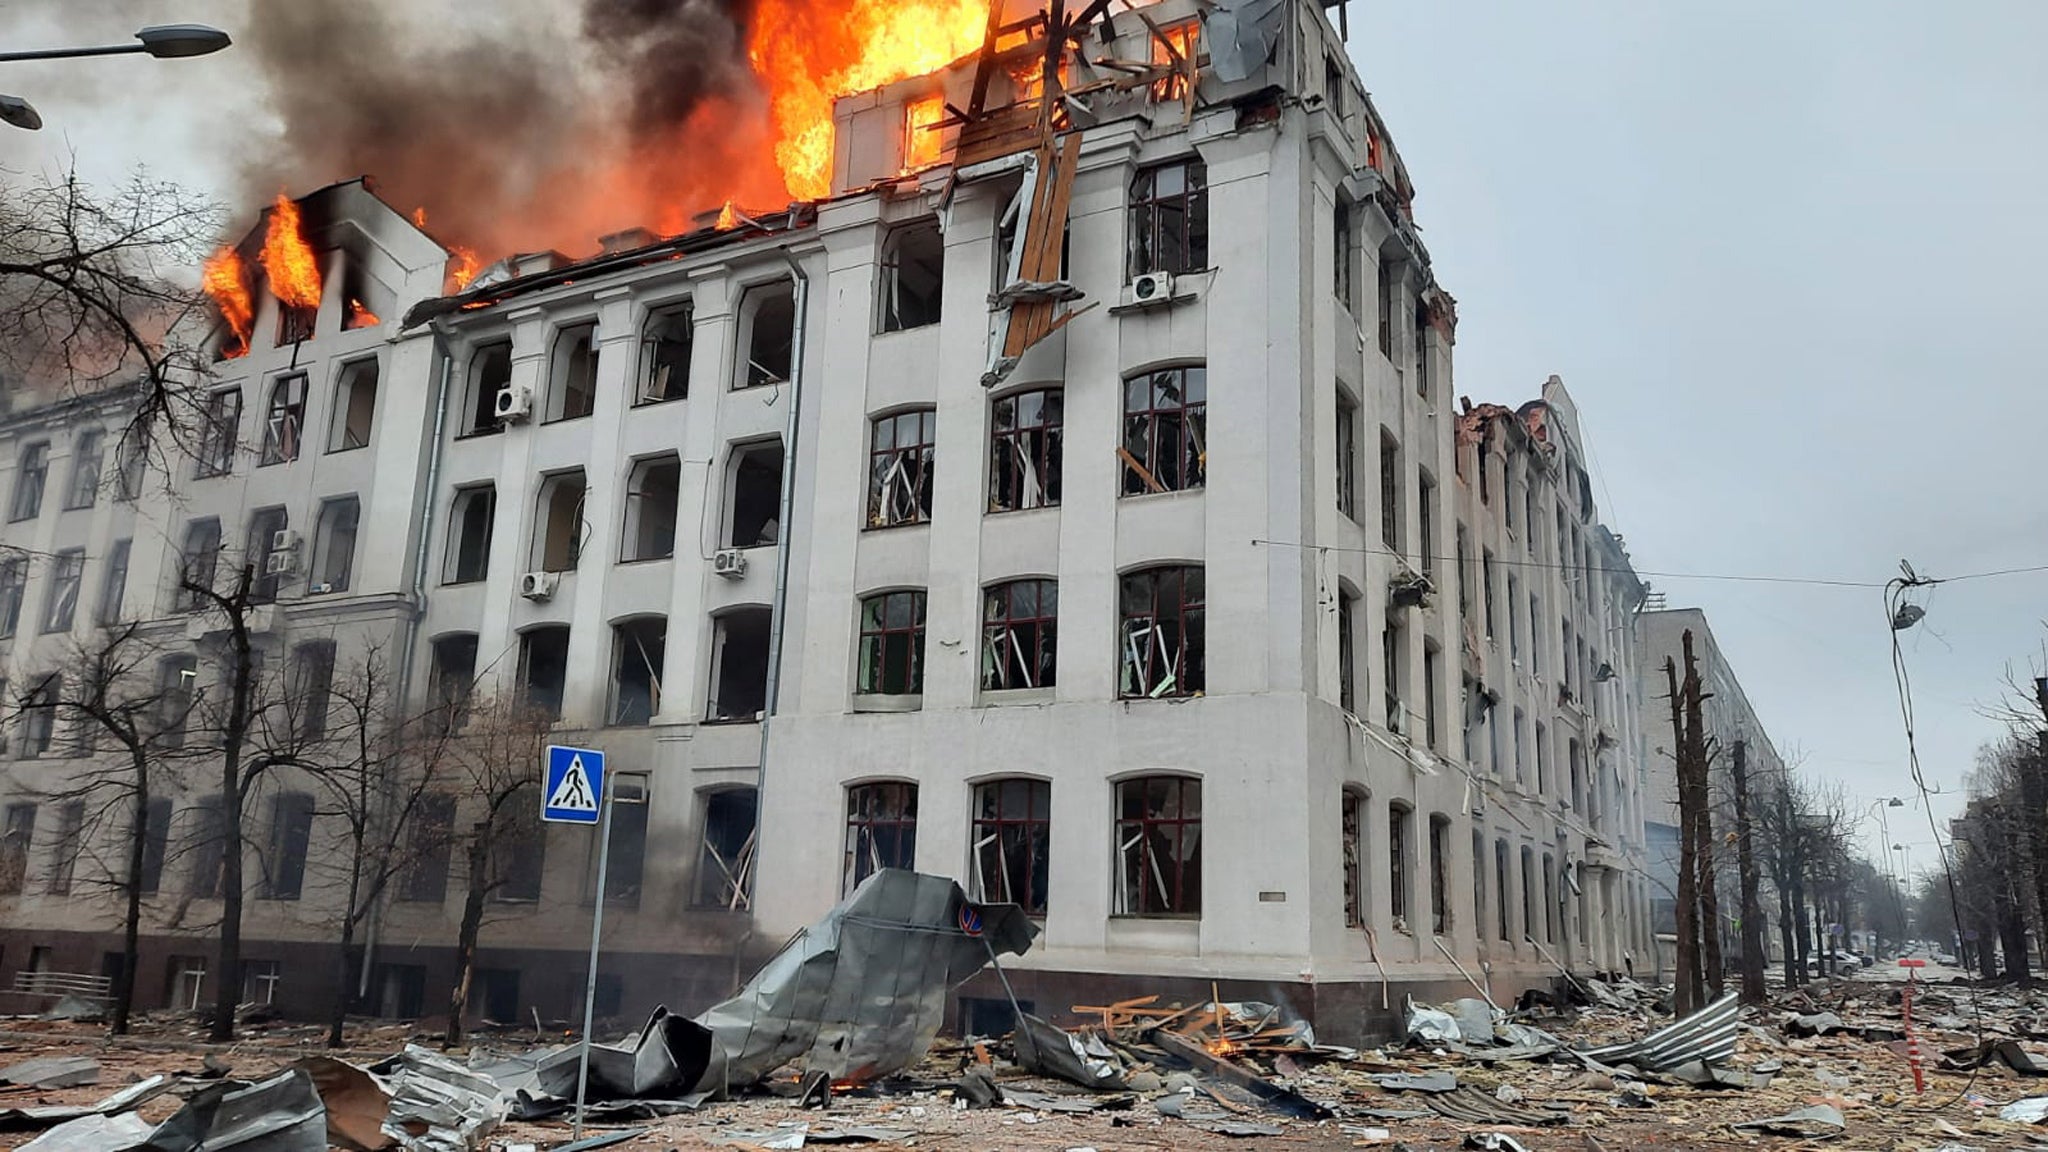 A photo released by the press service of the State Emergency Service of Ukraine shows a fire in a building of the Security Service of Ukraine (SBU) after shelling in Kharkiv